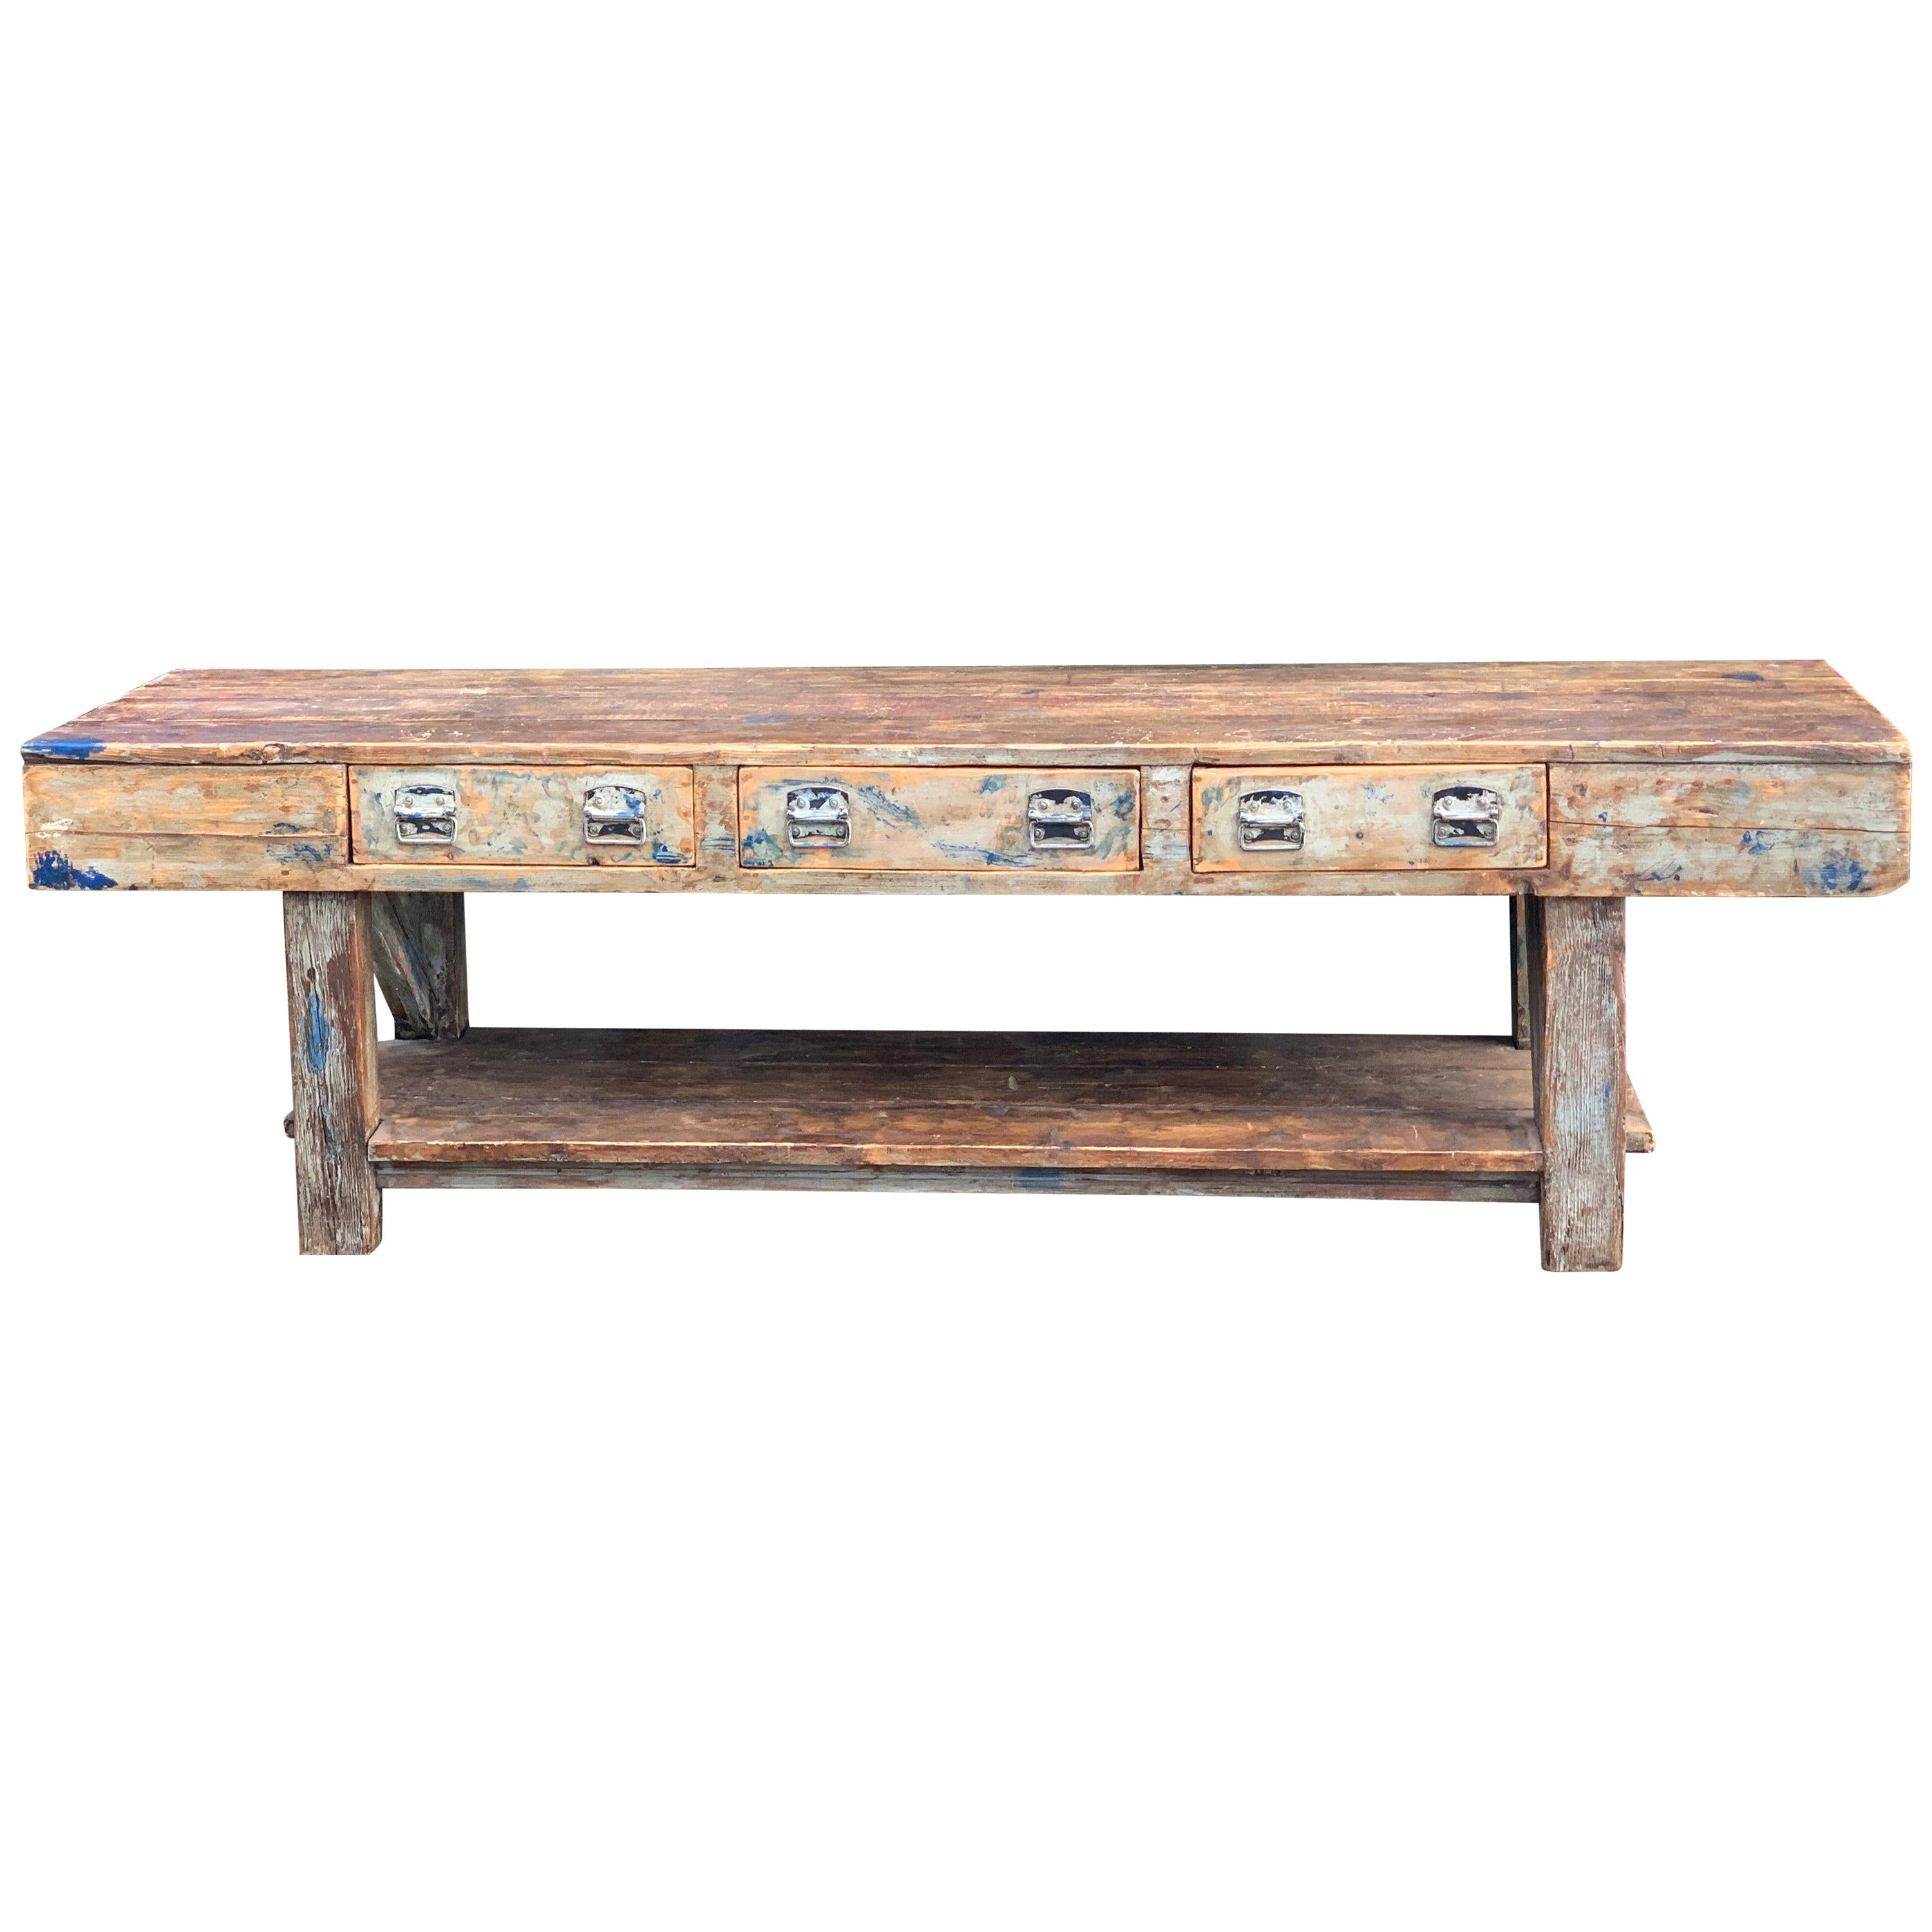 Industrial Table Oak and Pine Work Bench Sideboard Distressed Loft Style Antique